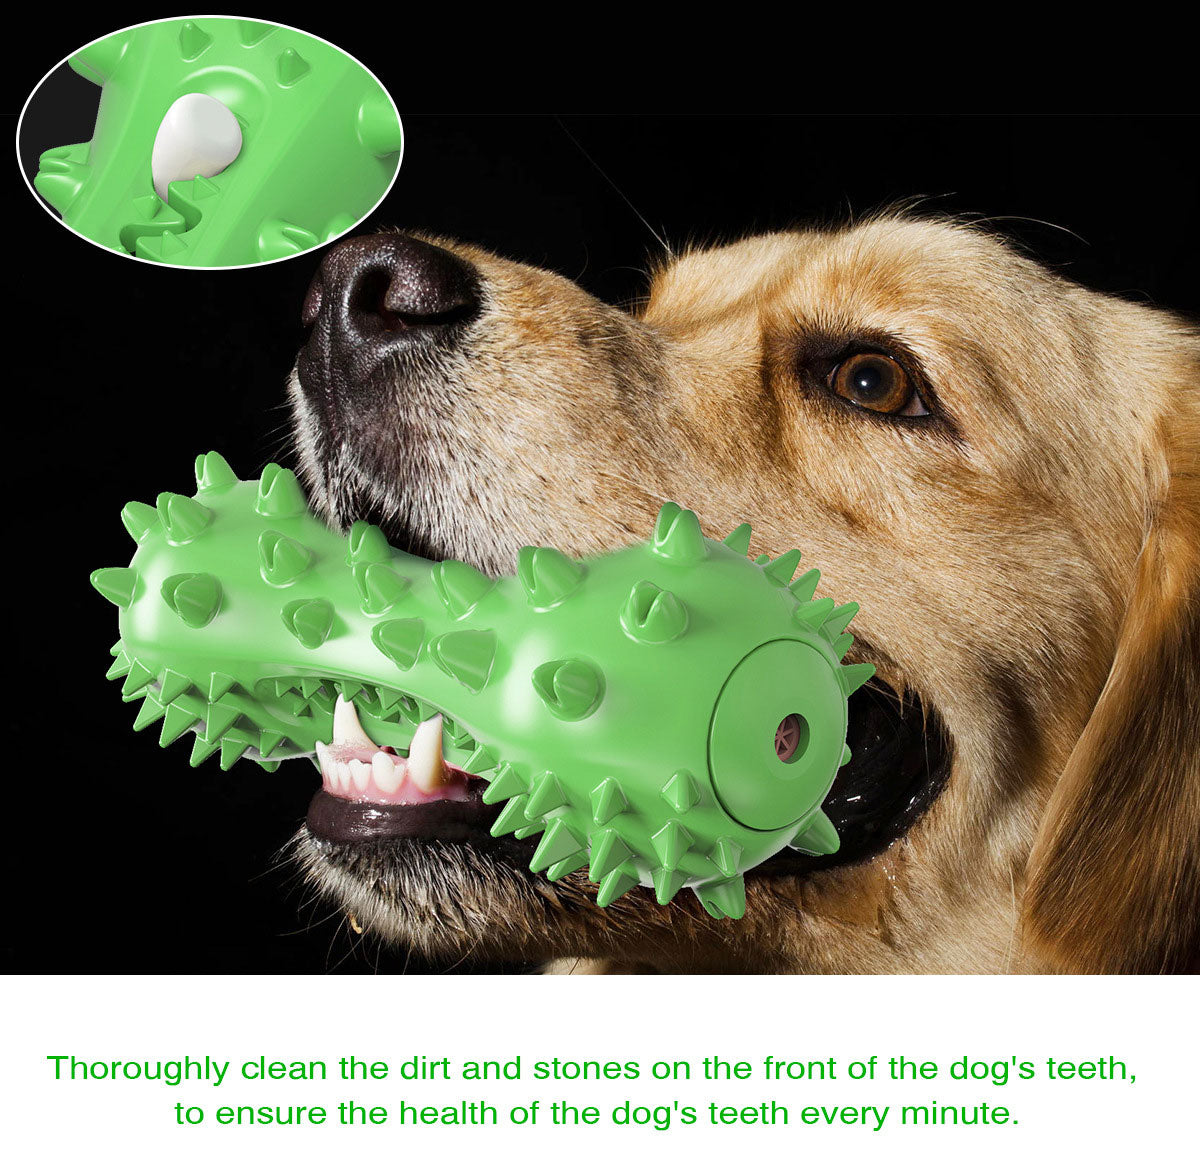 https://cdn.shopifycdn.net/s/files/1/0065/3629/8594/files/PETDURO_Dog_Toy_Toothbrush_Chew_Stick_Indestructible_Teeth_Cleaning_Squeaker_8.jpg?v=1596526939